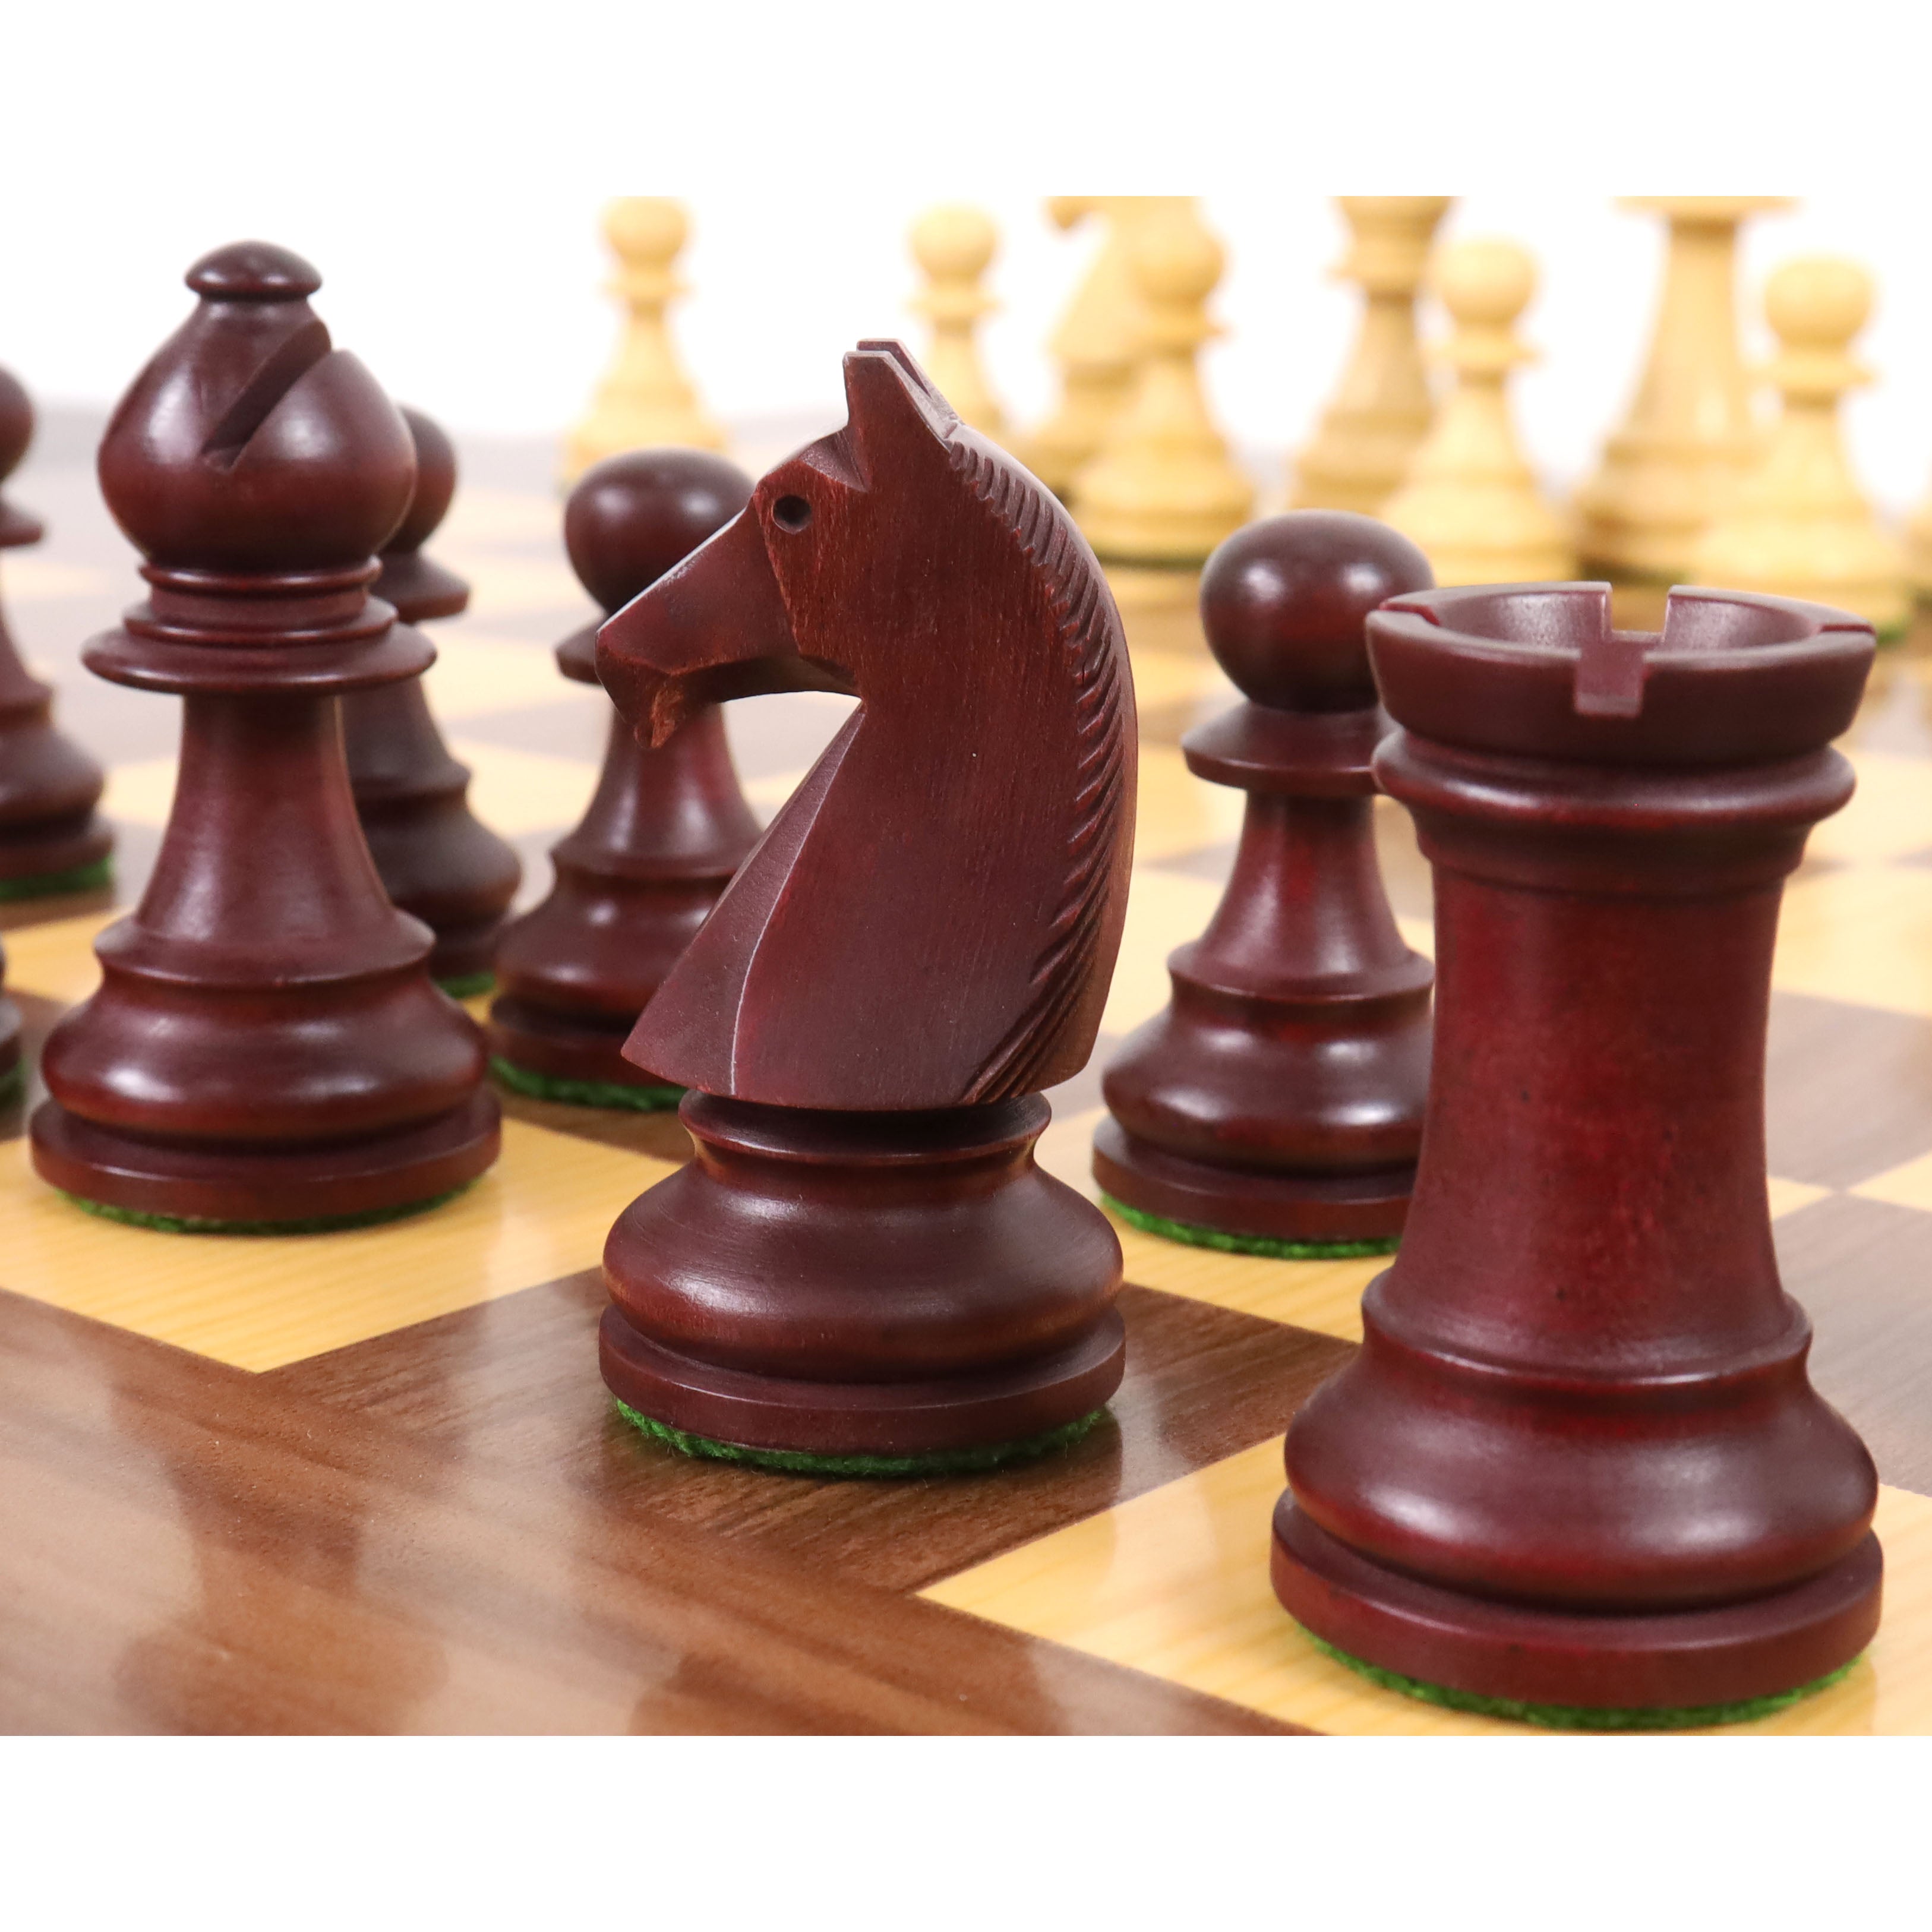 How To Set Up a Chess Board? - Royal Chess Mall – royalchessmall